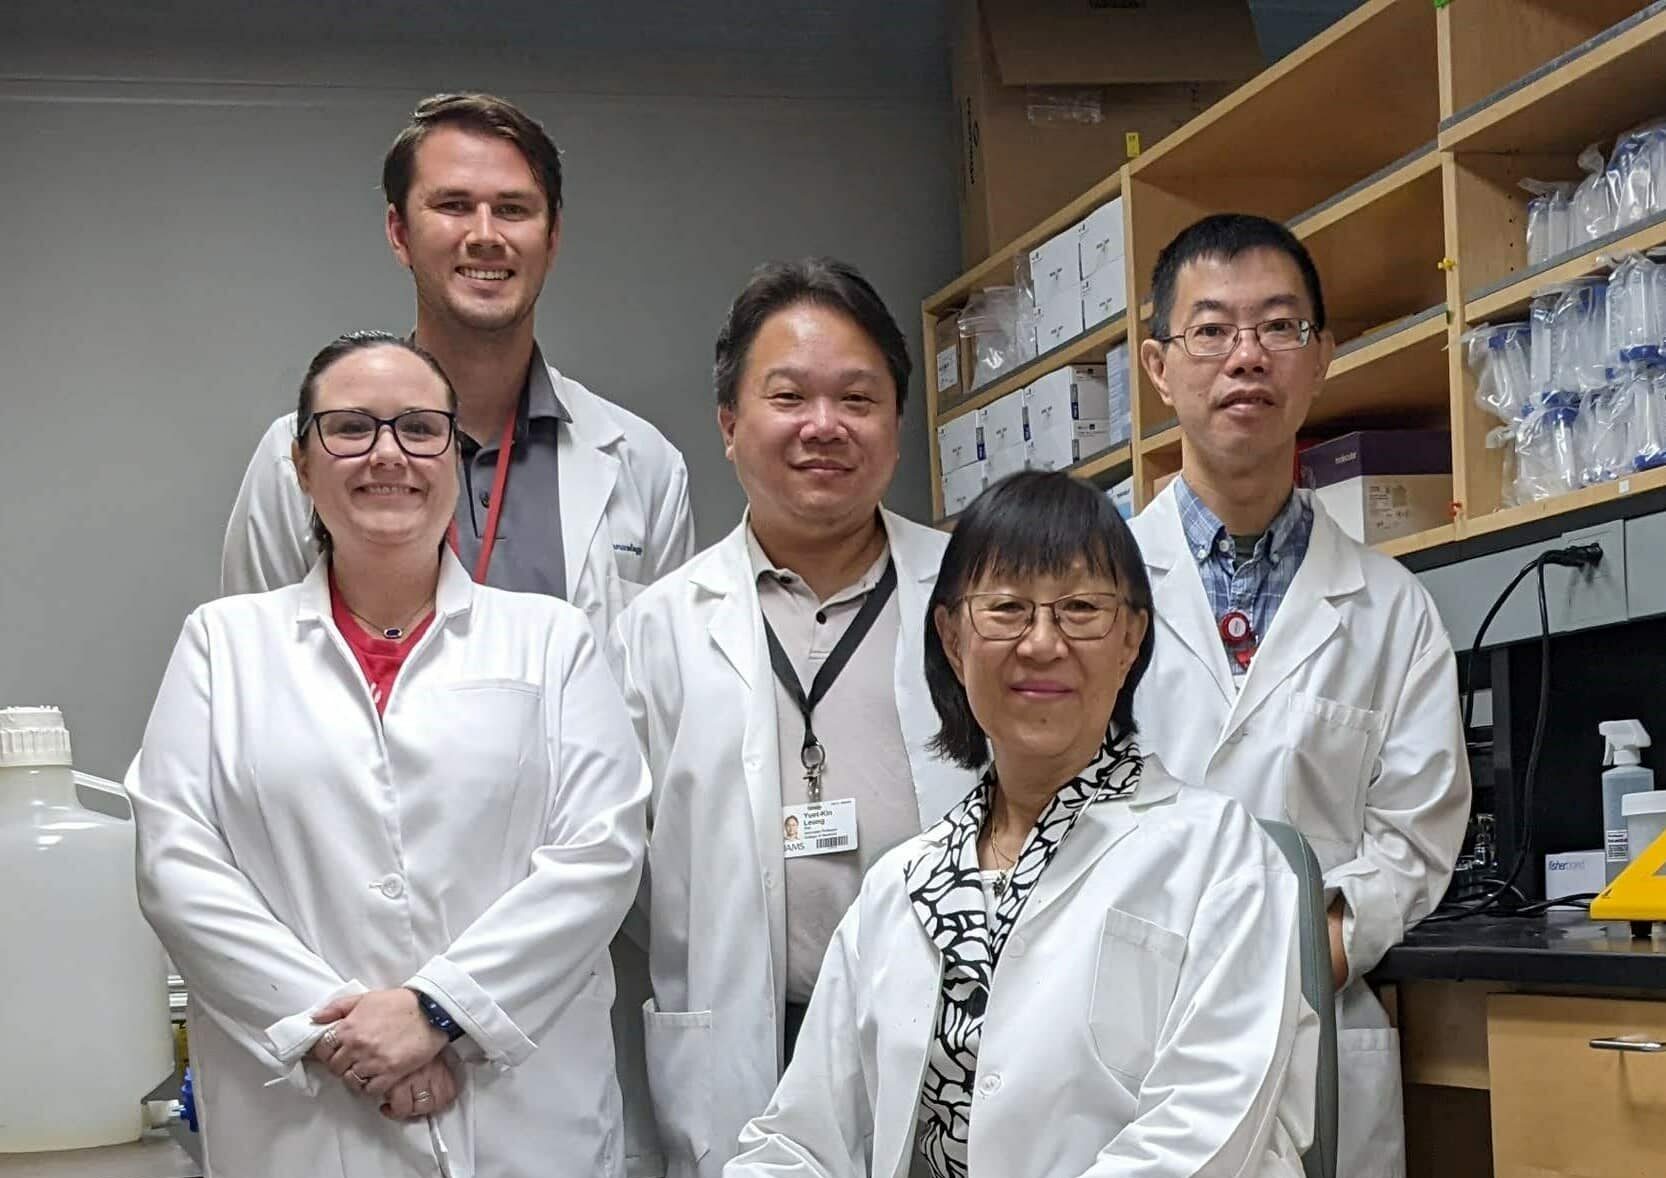 Shuk-Mei Ho, Ph.D., (front) with her lab/study team members: (second row, from left) Marybeth Shepard, technician, Ricky Leung, Ph.D., associate professor, and Neville Tam, Ph.D., assistant professor; (back) Alex McDonald, technician.